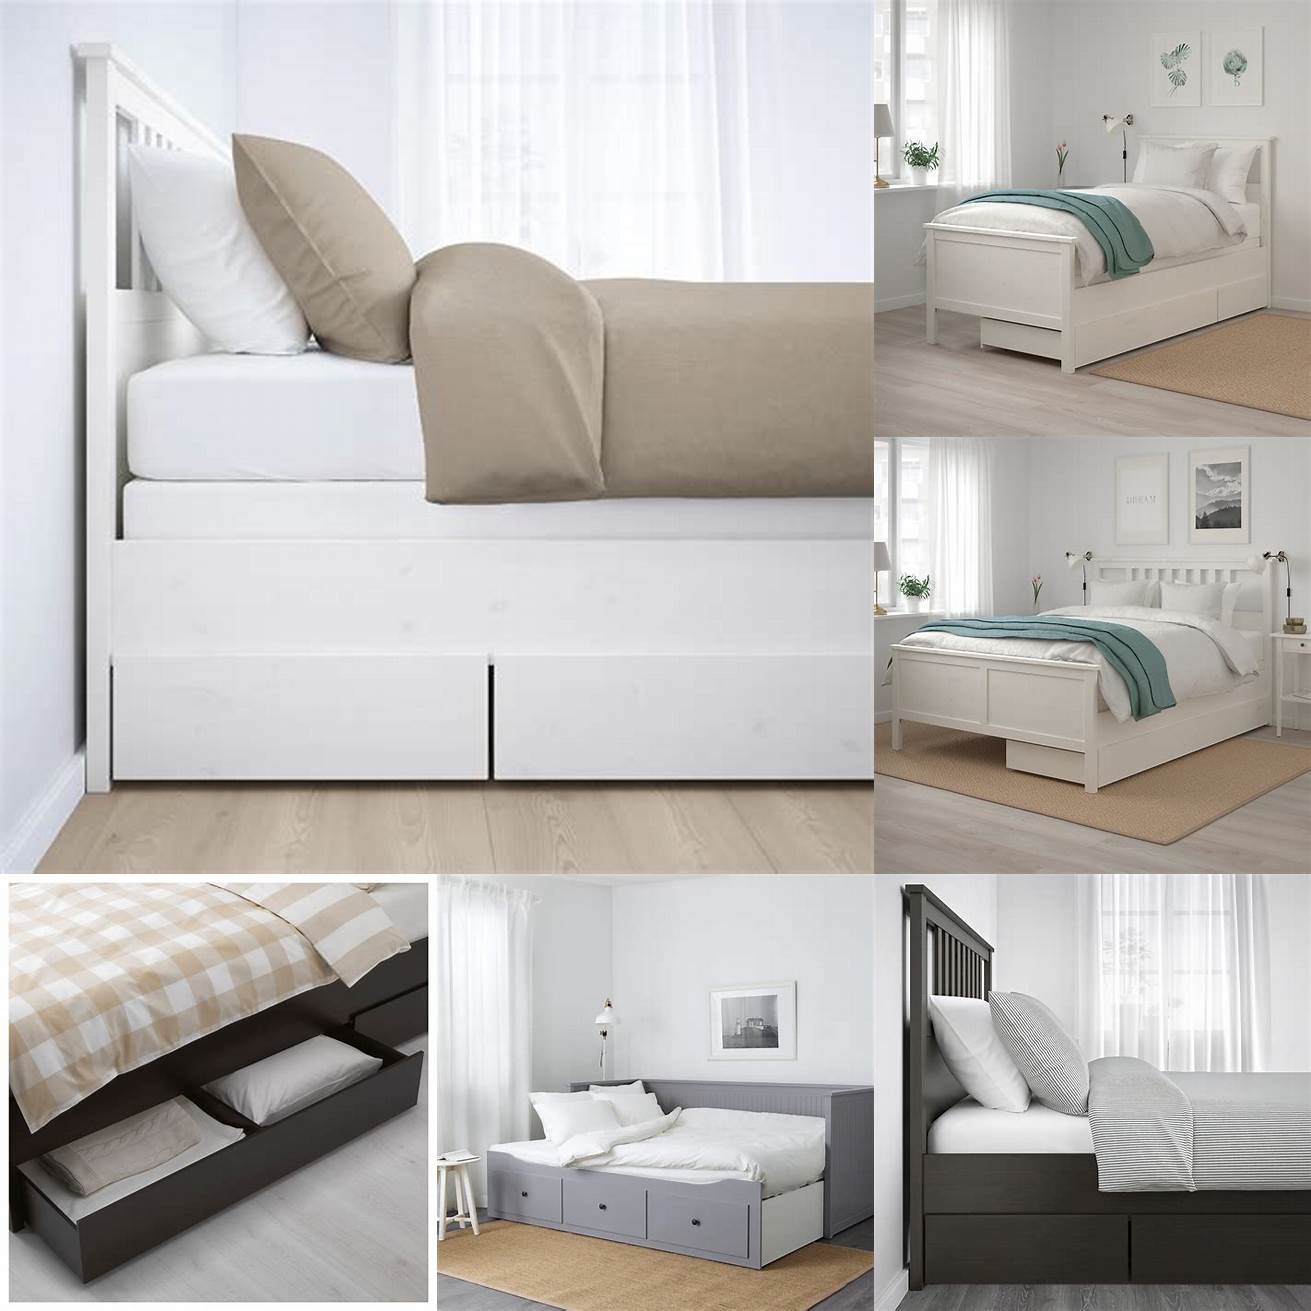 The Hemnes Bed Frame with under-bed storage drawers